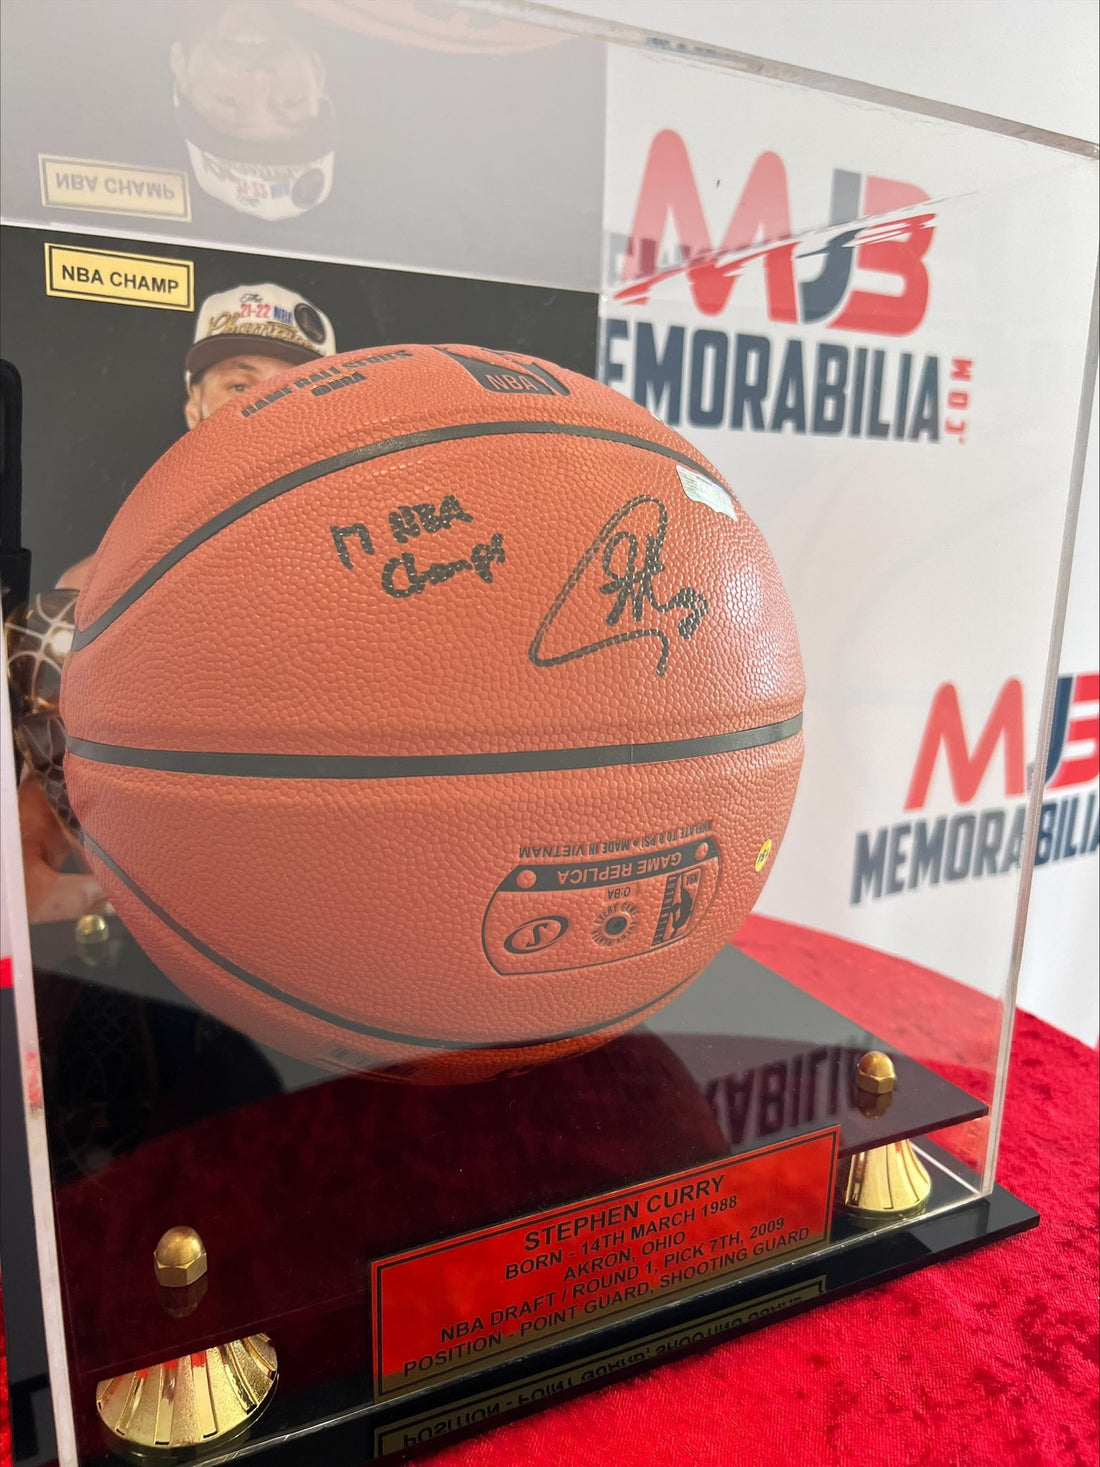 Gold Coast Superfan Scores a Signed Steph Curry NBA Basketball for his Man Cave